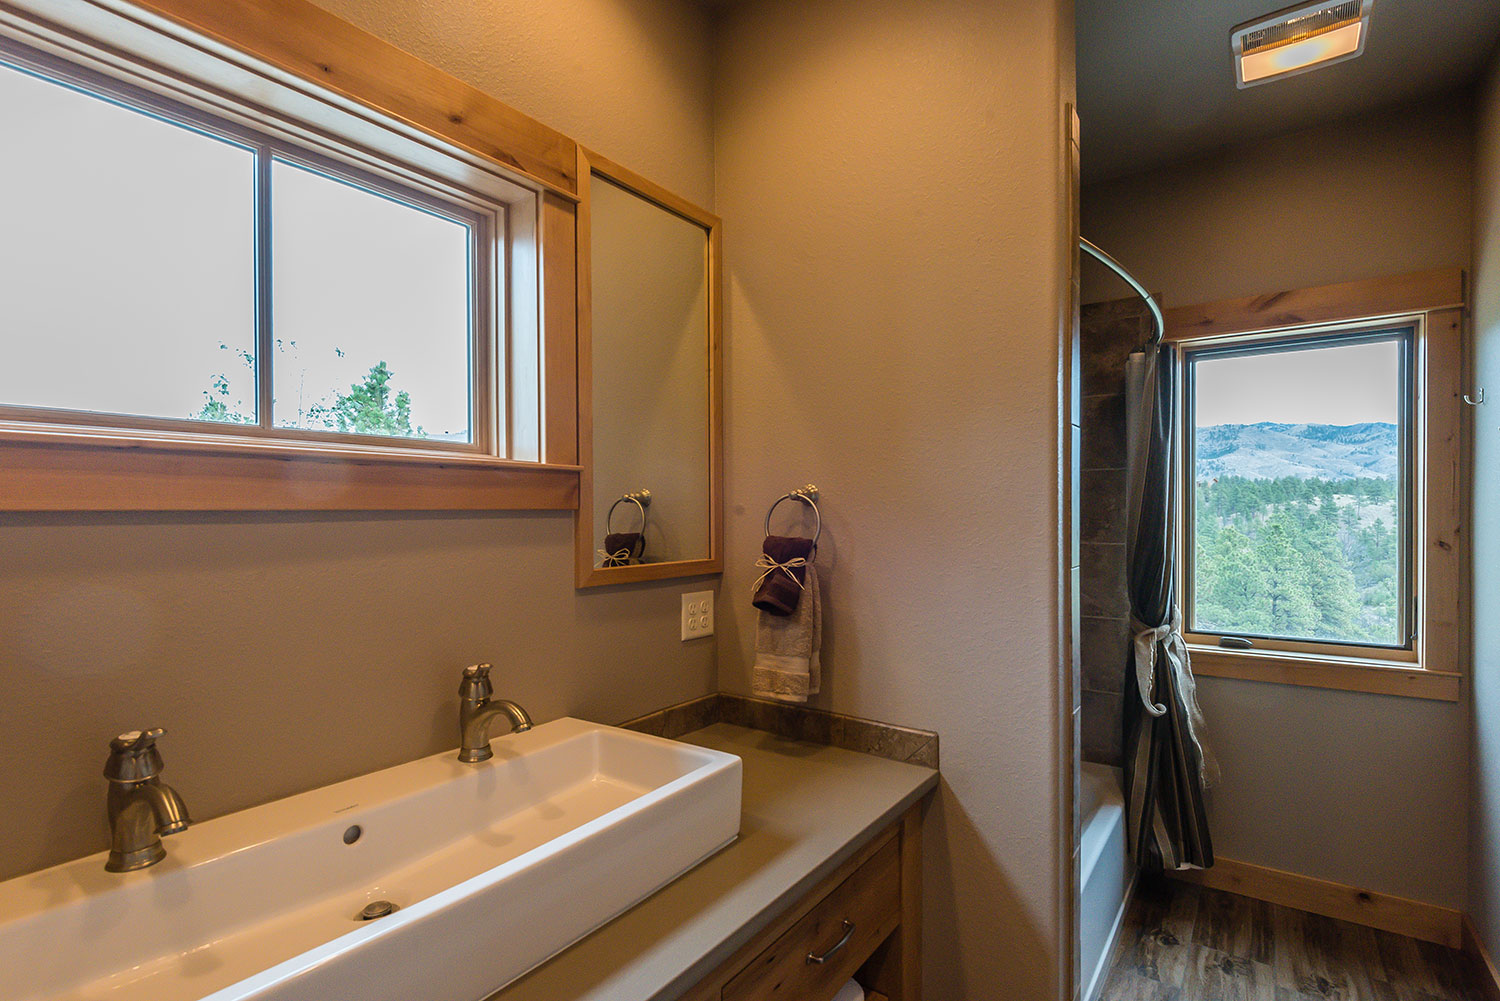 Bathroom with long rectangular sink with two faucets below a window with a shower and another window further back